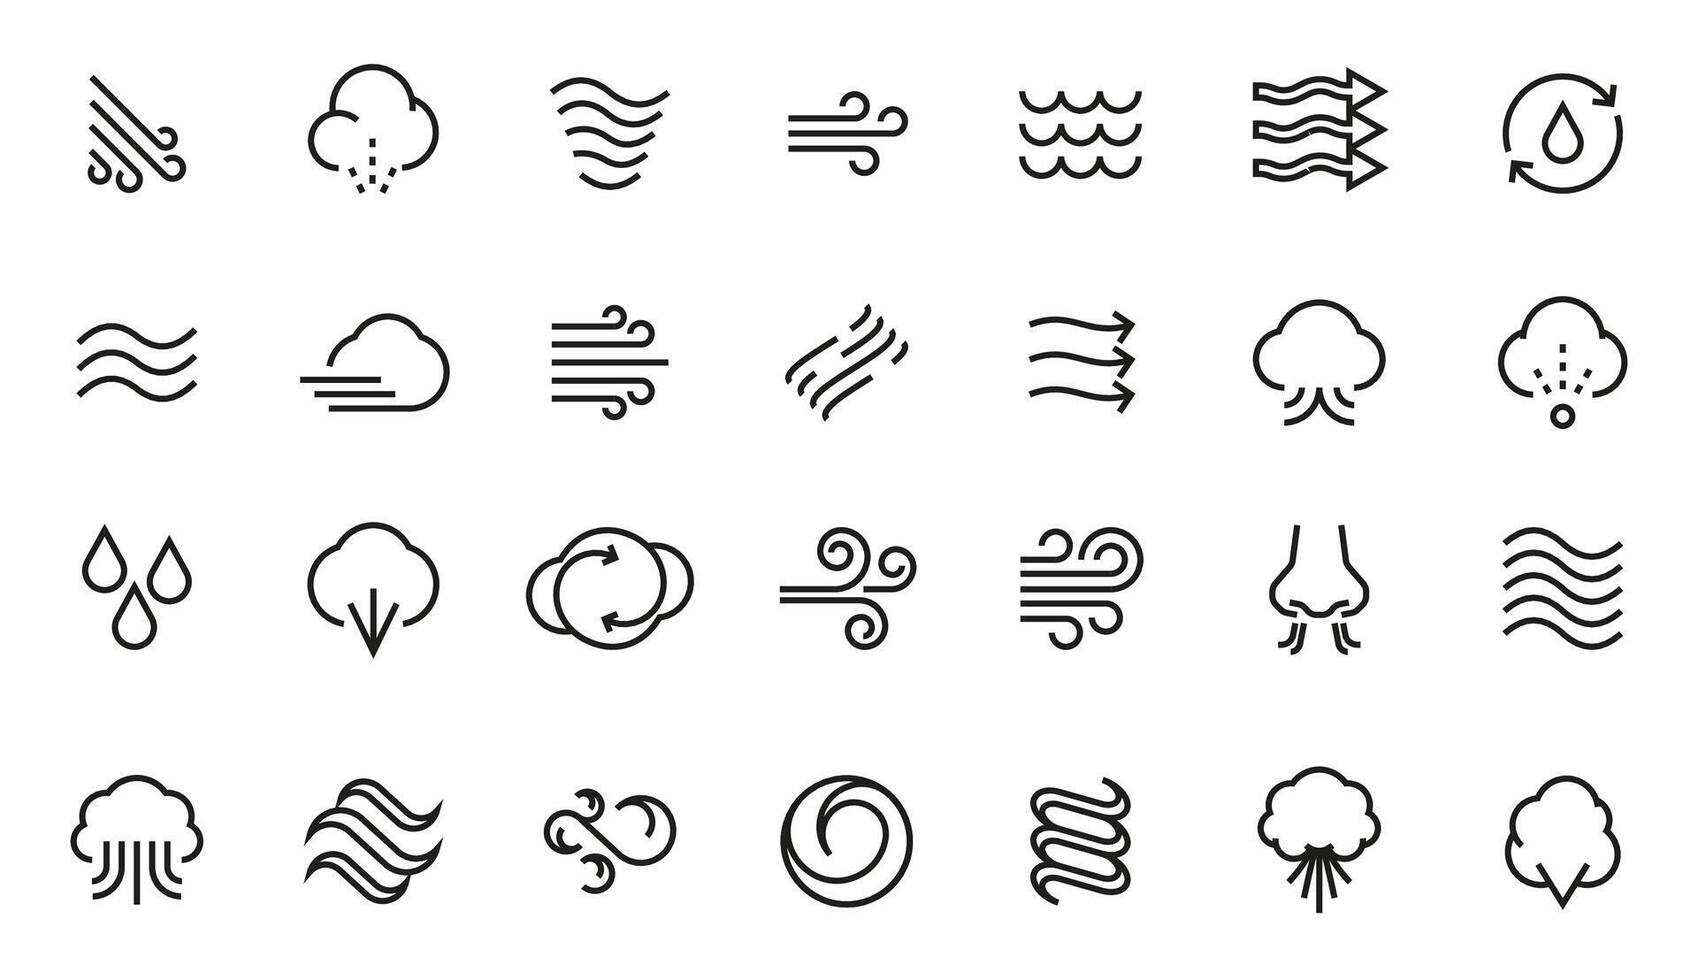 Wind icons. Thin tornado stream line blizzard hurricane zephyr wind elements, flat abstract swirls and flow for logo design. Vector isolated set